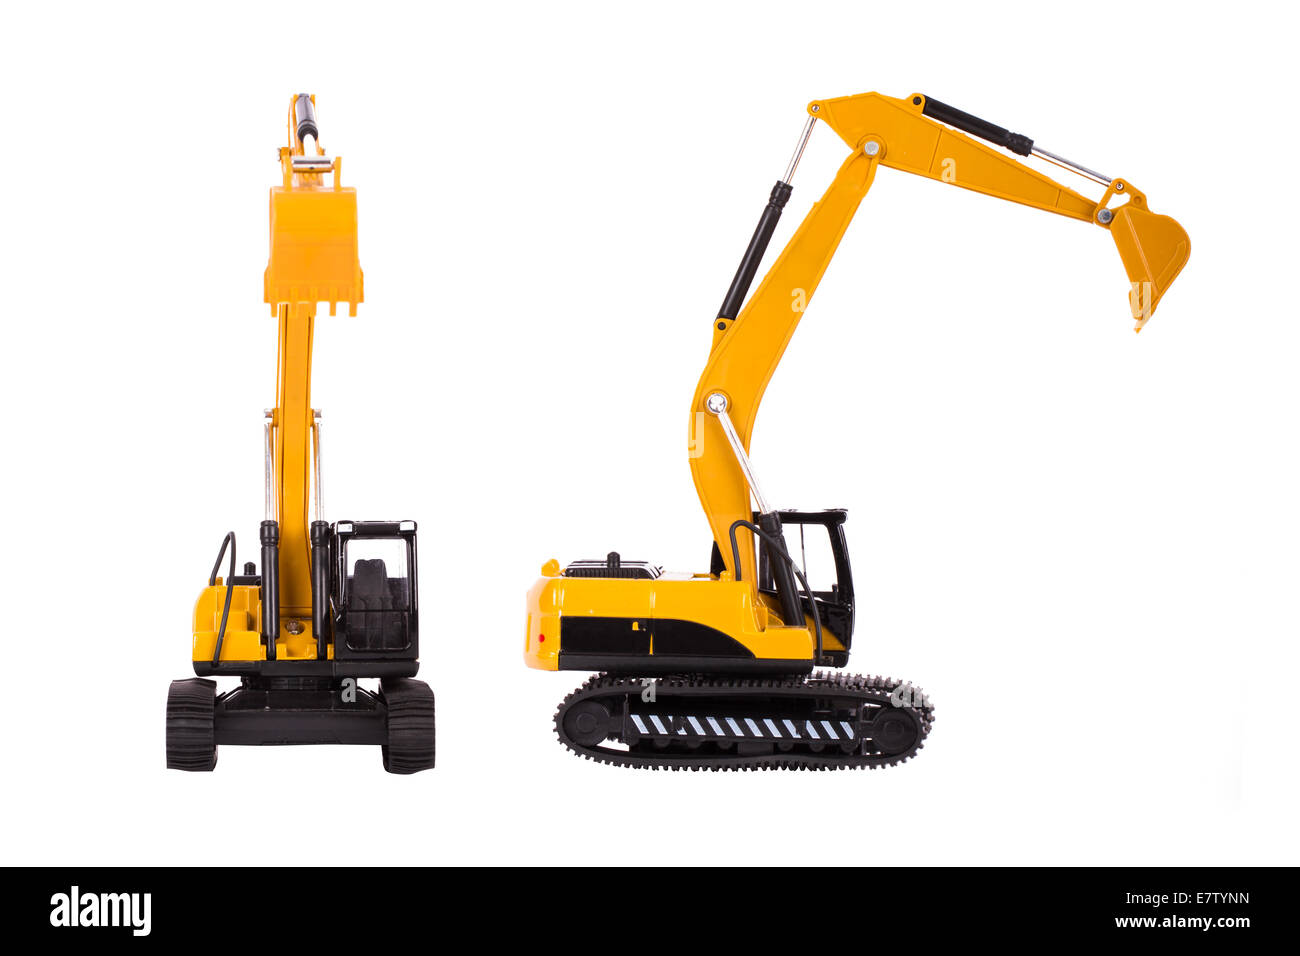 Construction machine, front and side view of excavator, isolated on white background. Stock Photo